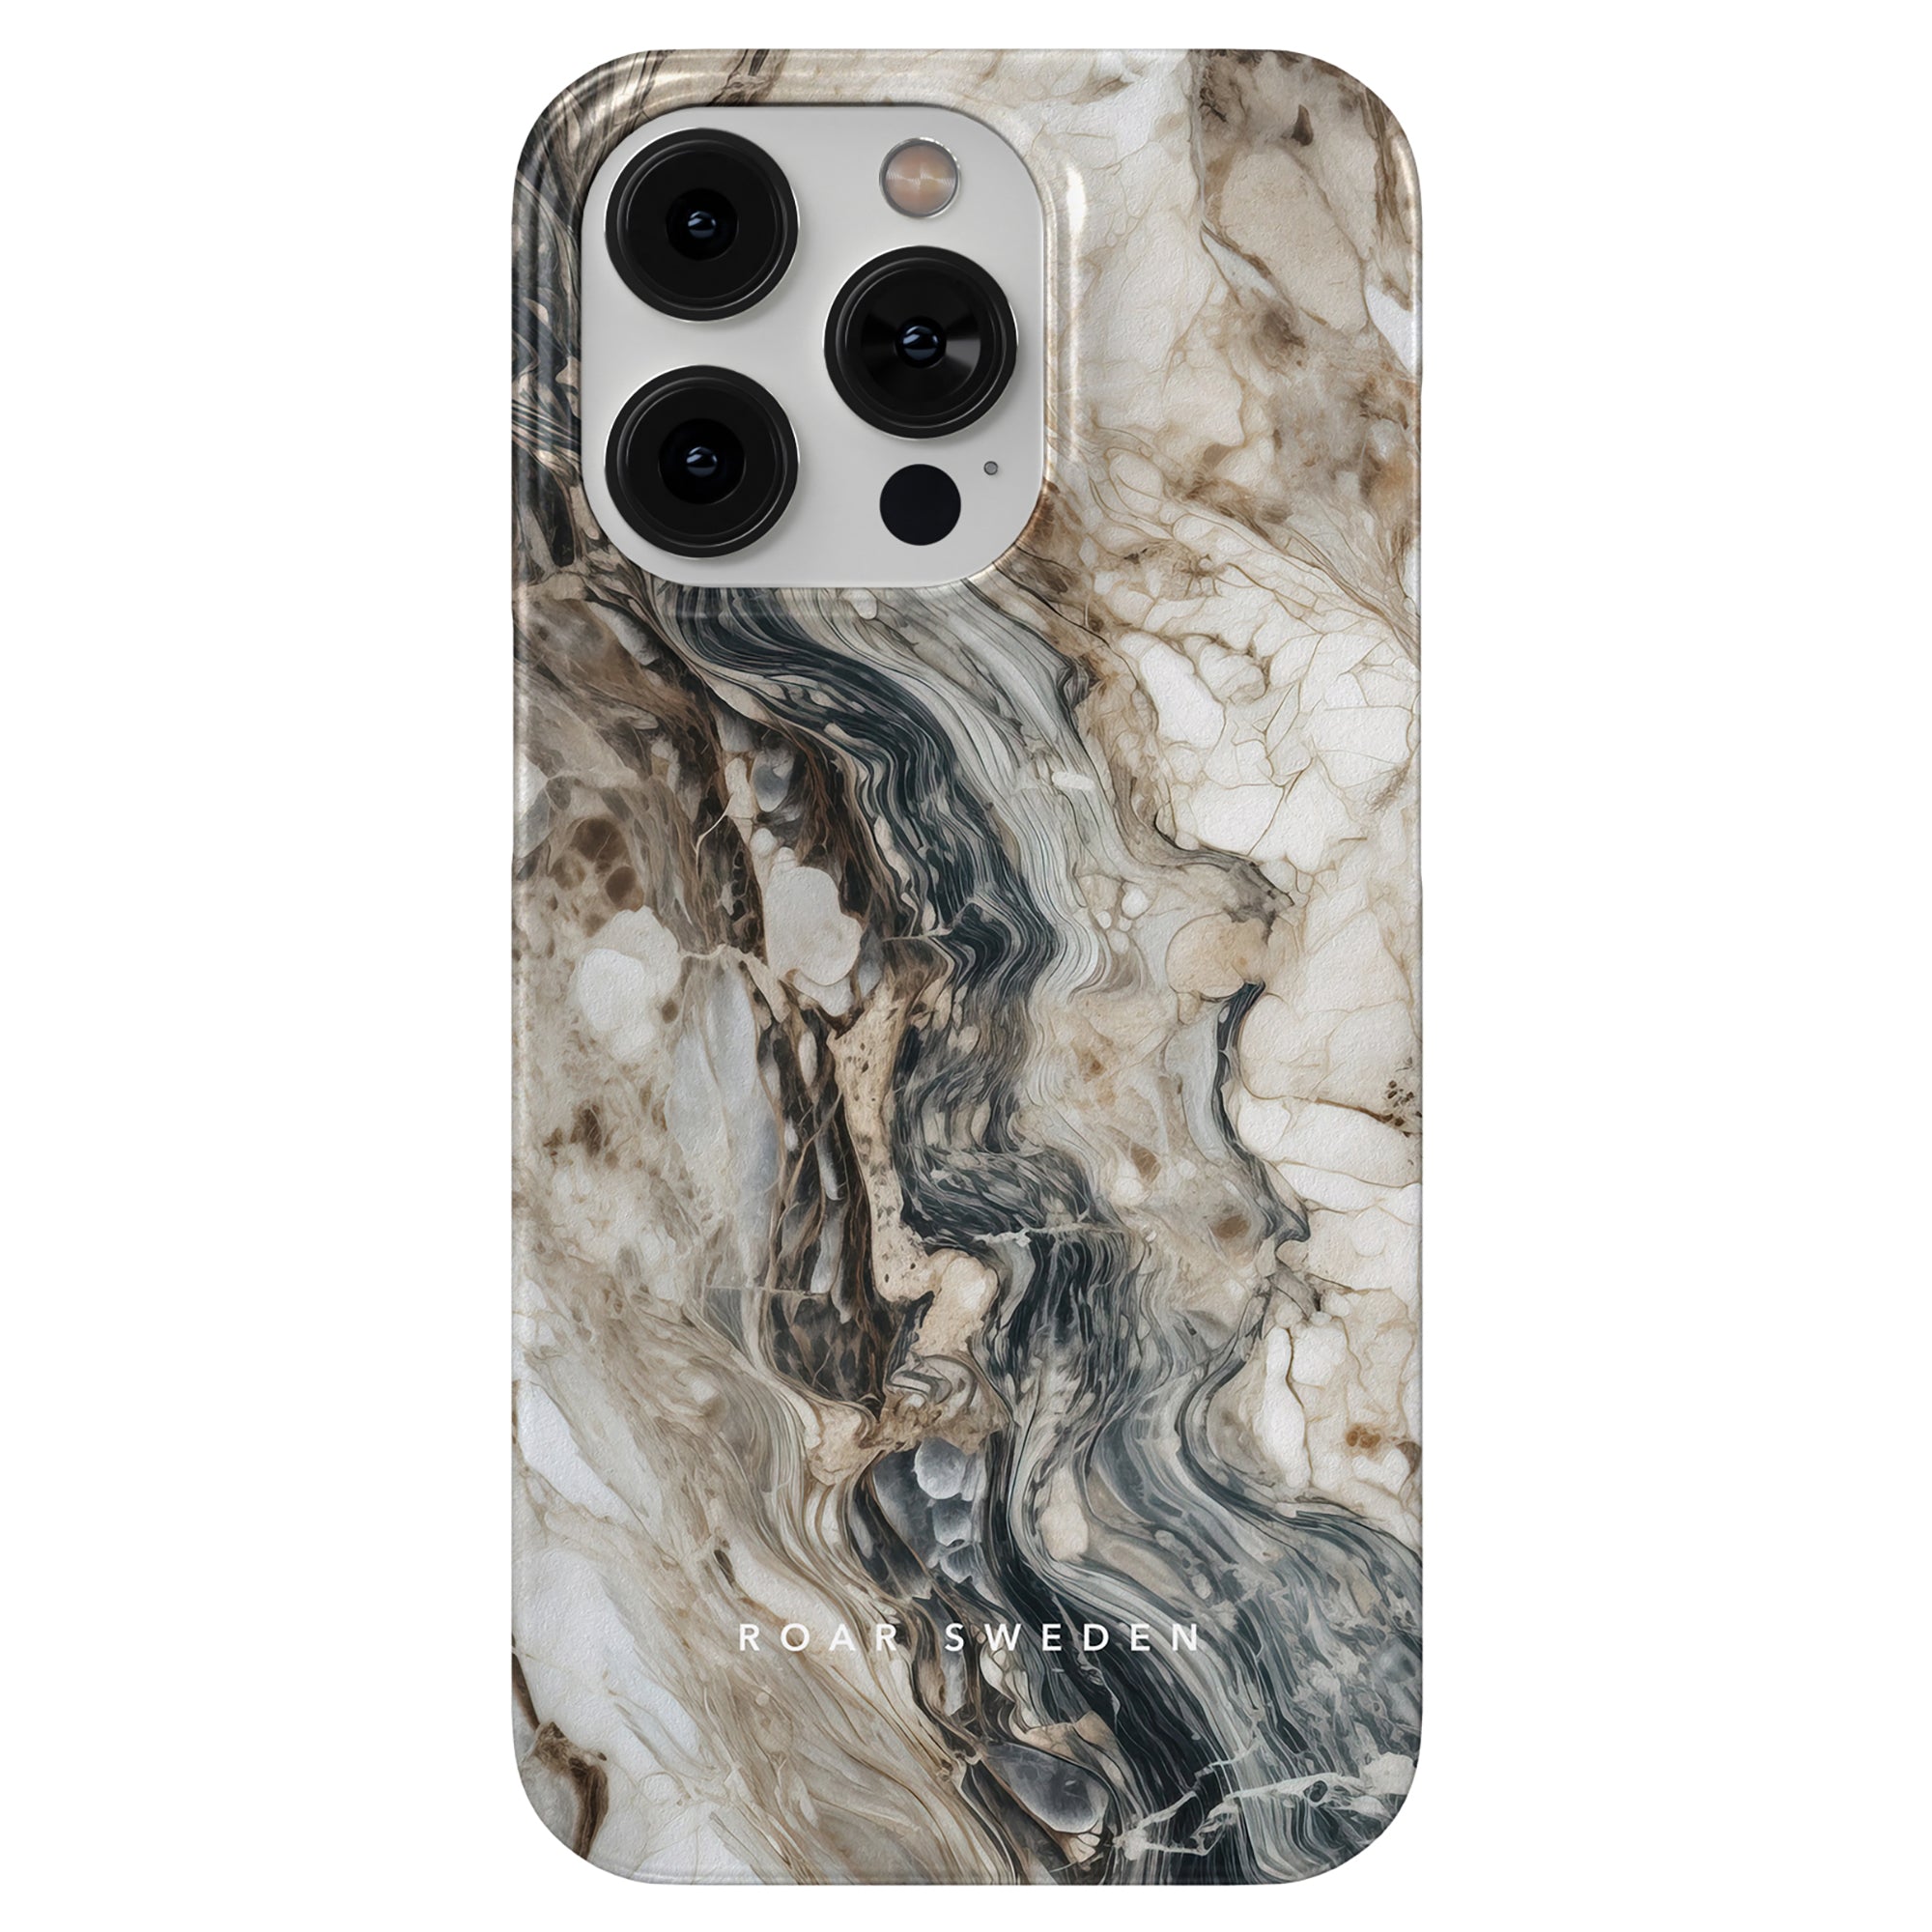 A phone case with a marbled stone design in shades of brown, white, and gray, featuring the text "ROAR SWEDEN" at the bottom. The Napoleon - Slim case is for a smartphone with triple rear cameras, crafted to högsta kvalité.